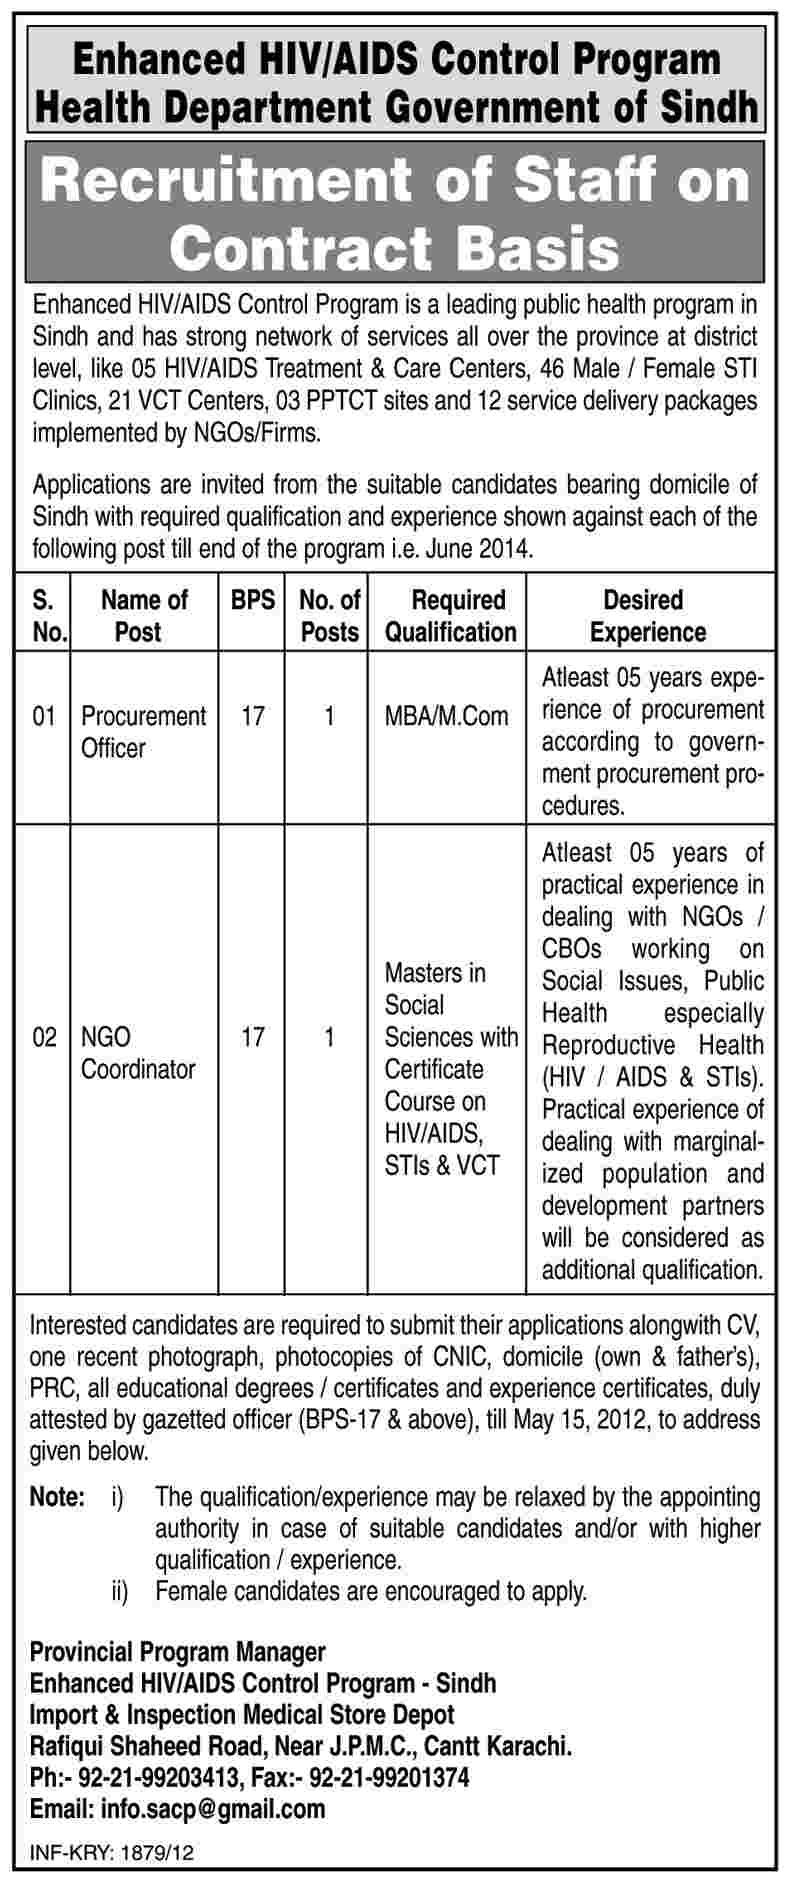 Recruitment of Staff on Contract Basis at Health Department of Sindh (Govt. Job)